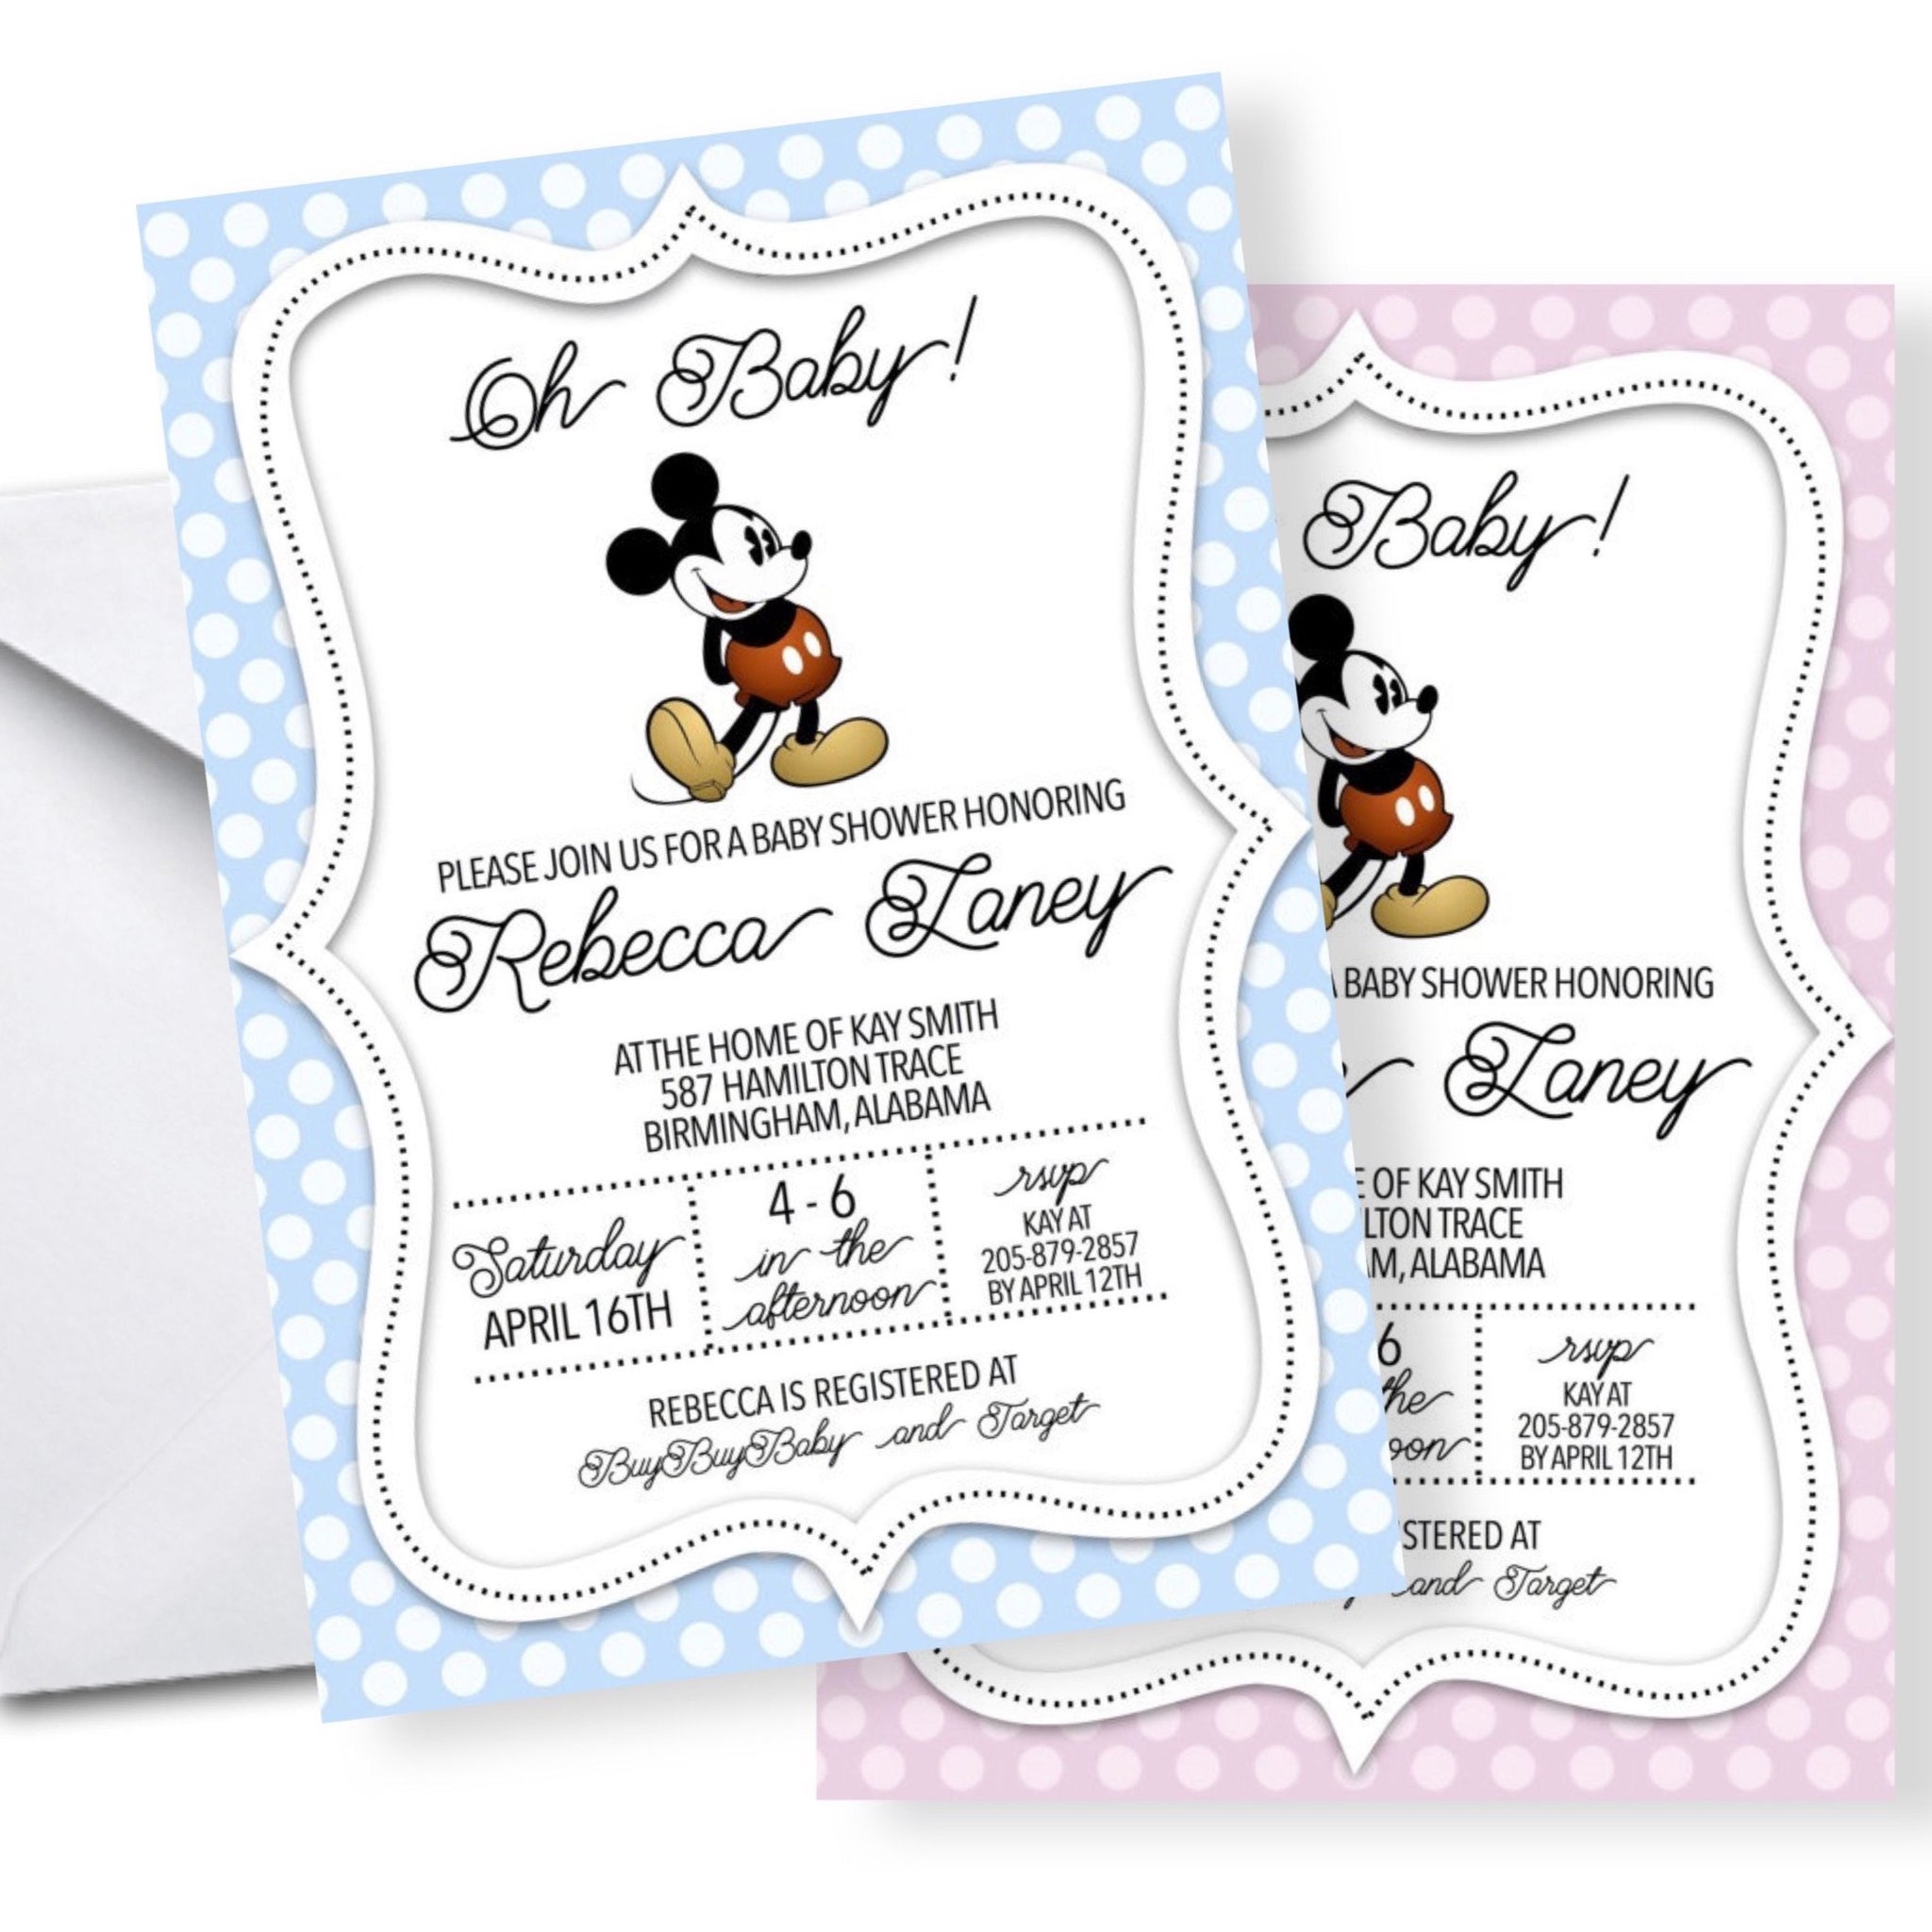 Baby Shower Invitation Featuring Vintage Mickey Mouse